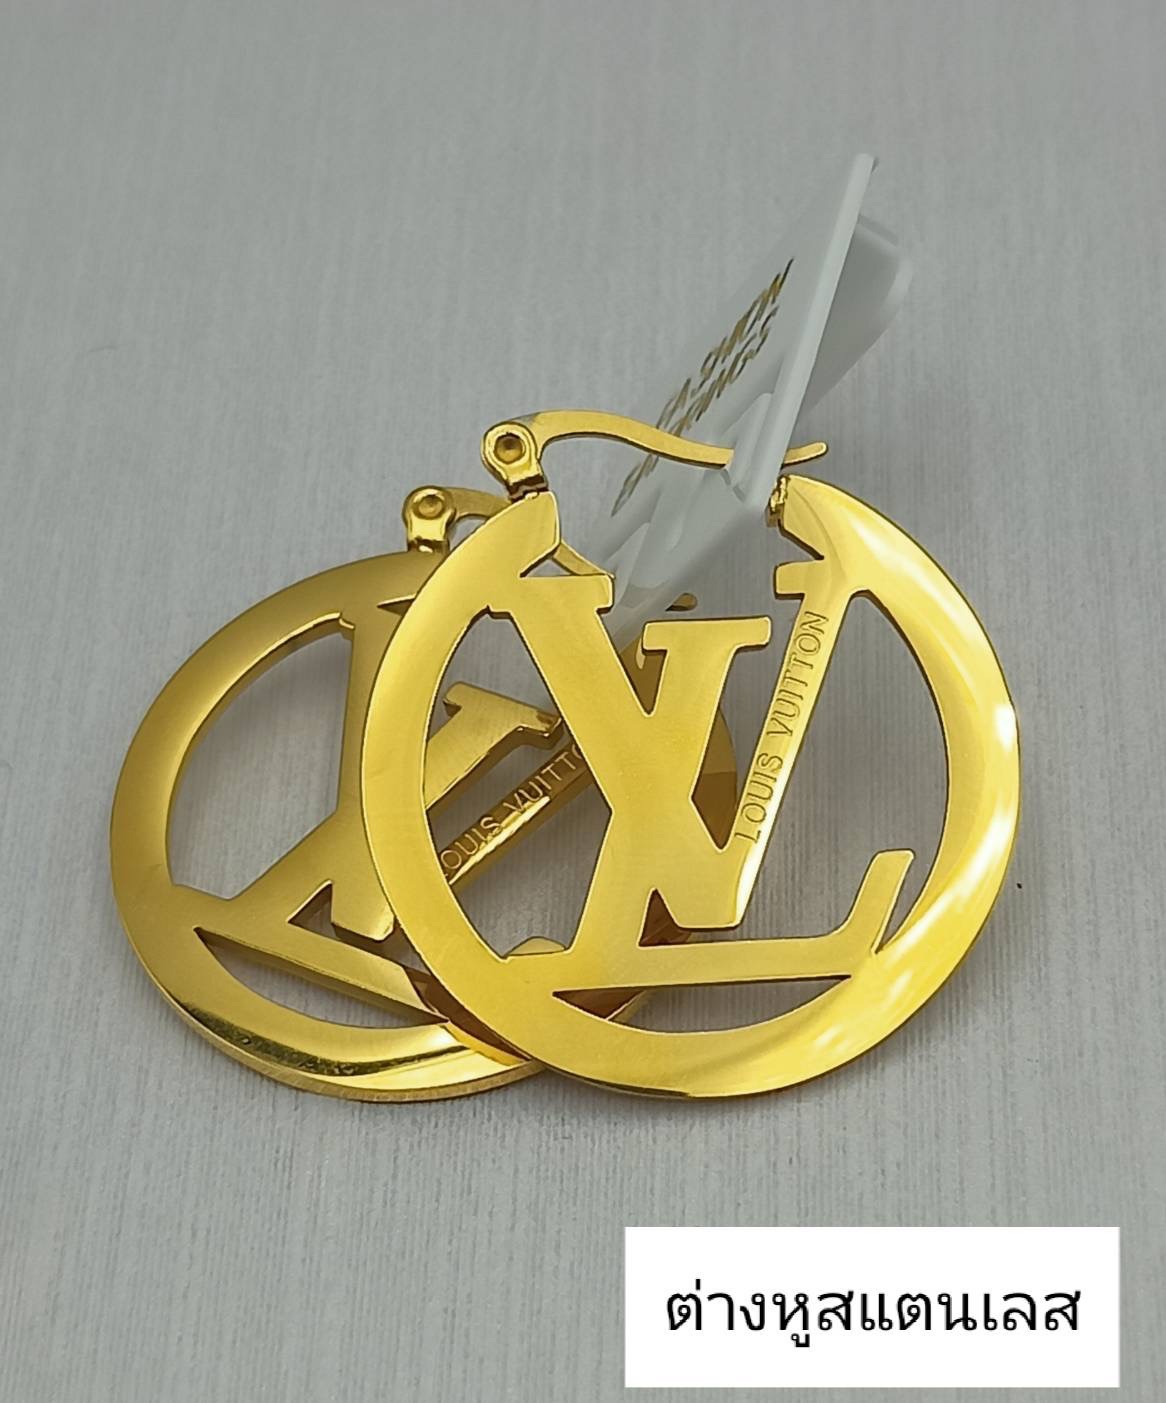 Louis Vuitton 2022 Cruise Lv Iconic Earrings (M00743)